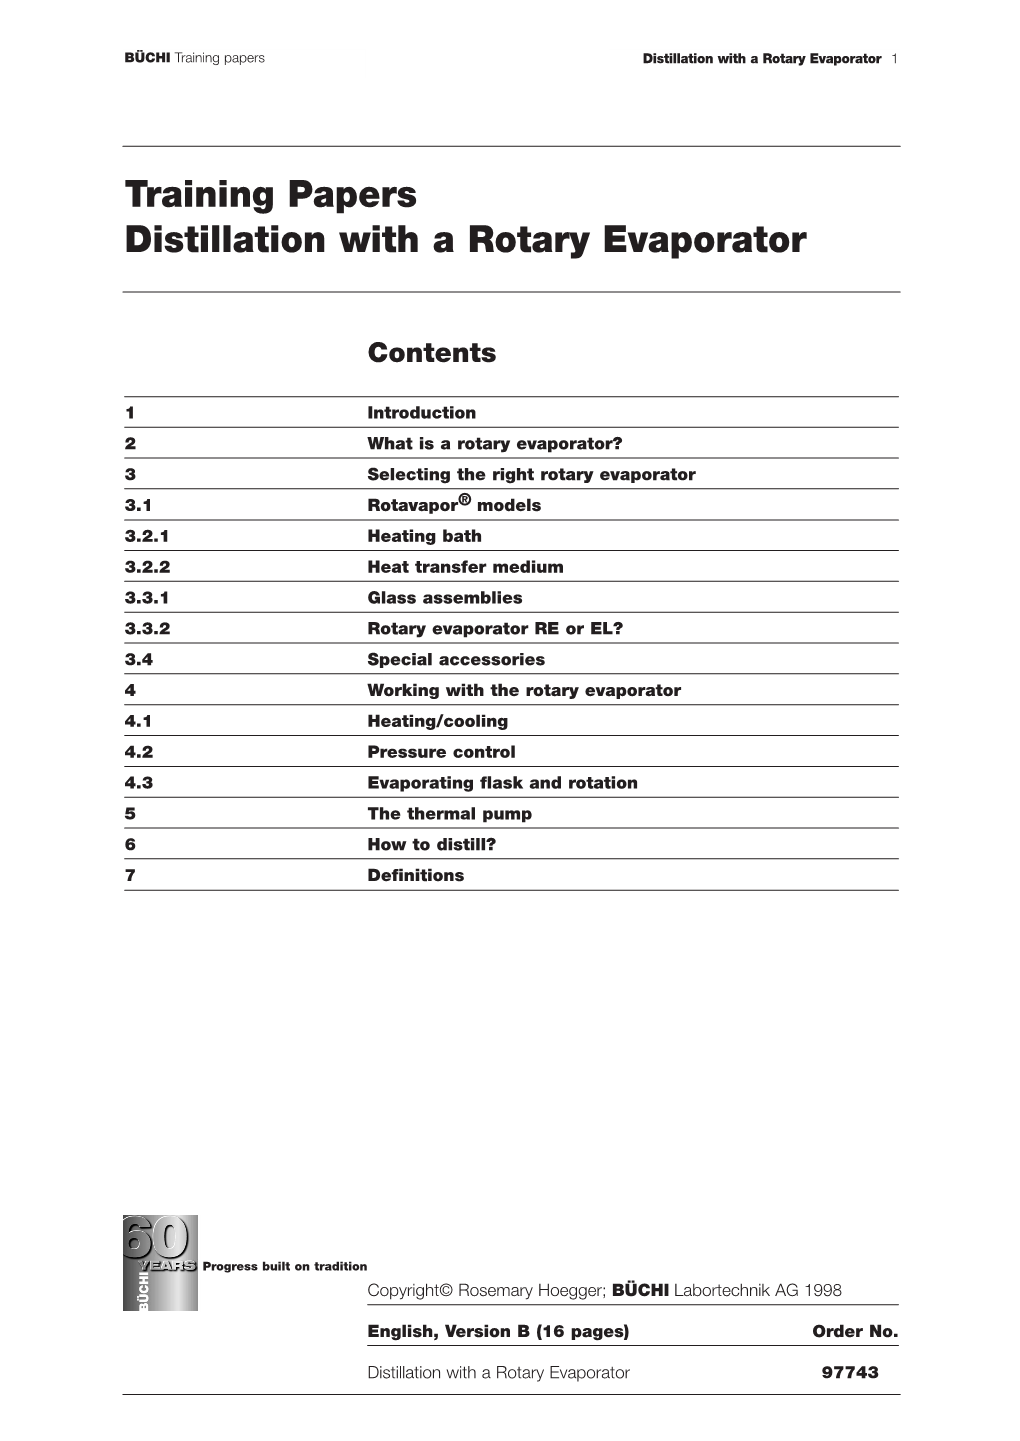 Training Papers Distillation with a Rotary Evaporator 1